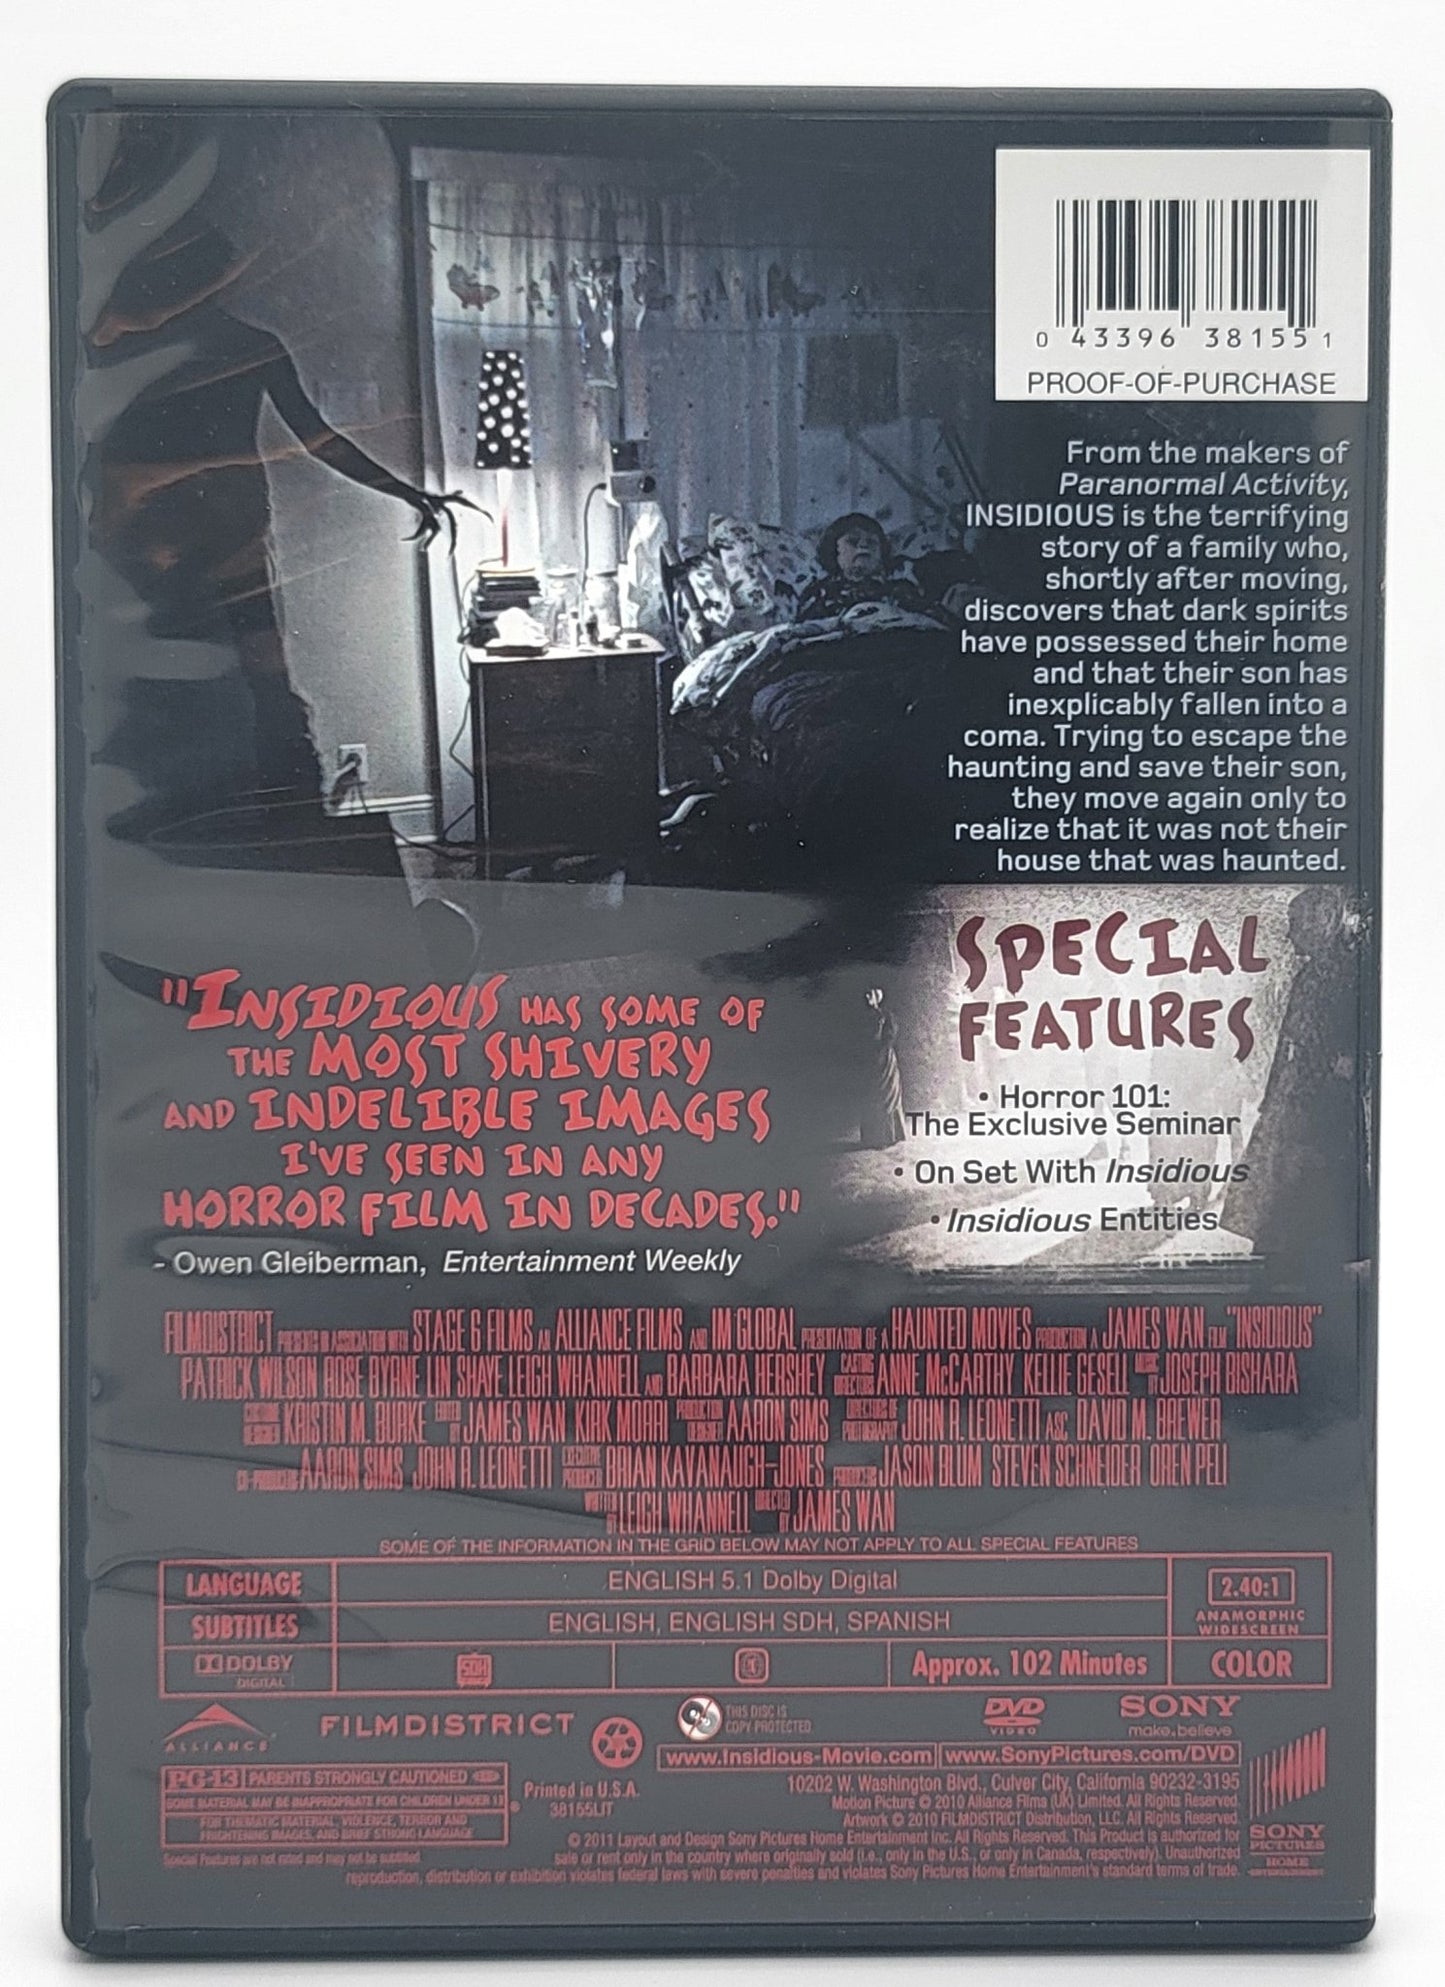 Sony Pictures Home Entertainment - Insidious | DVD | Widescreen - DVD - Steady Bunny Shop